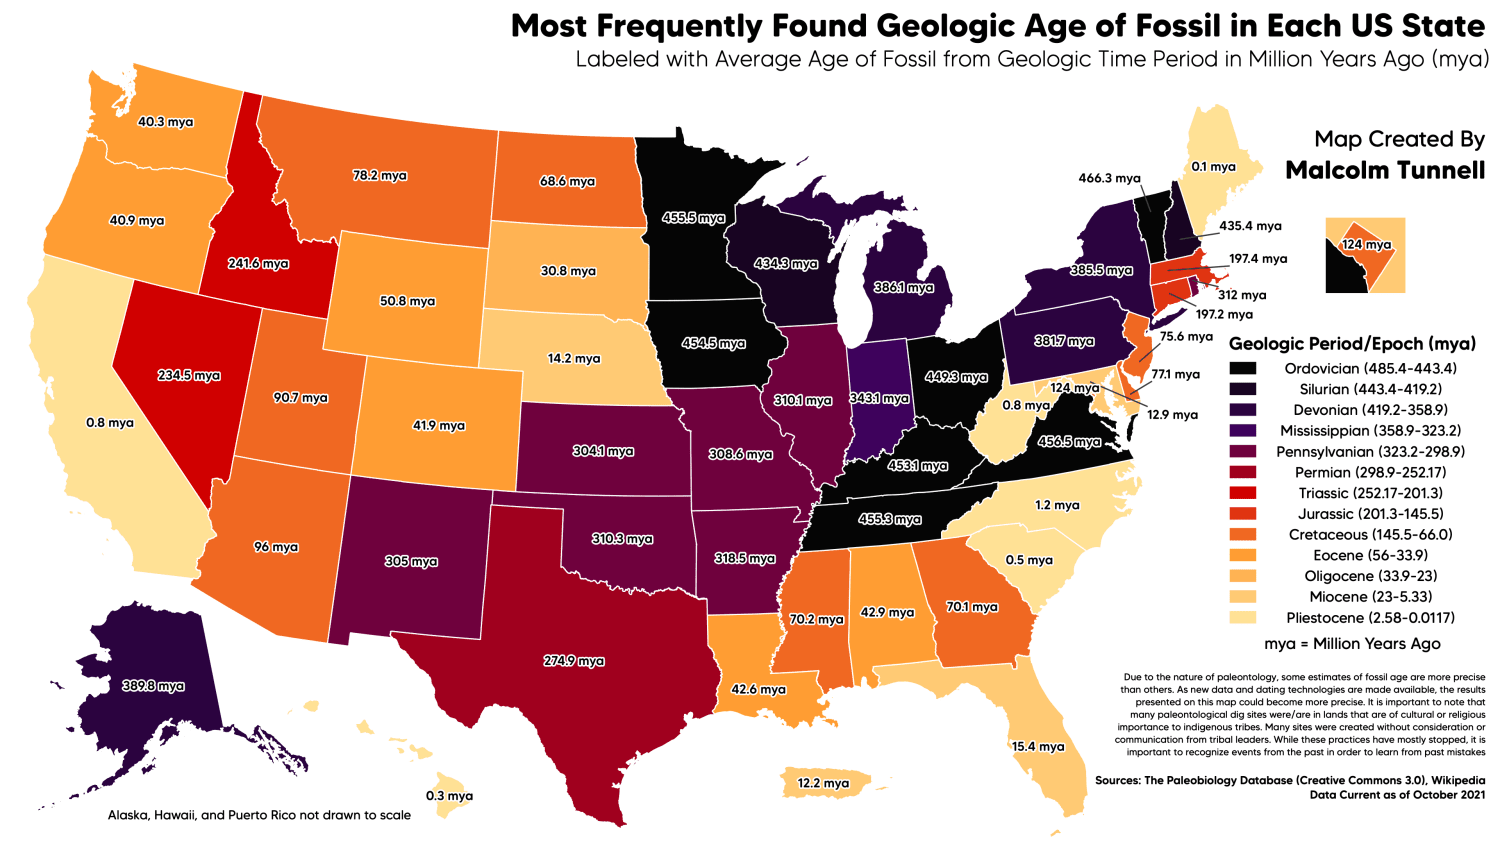 Most Frequently Found Geologic Age of Fossil in Each US State